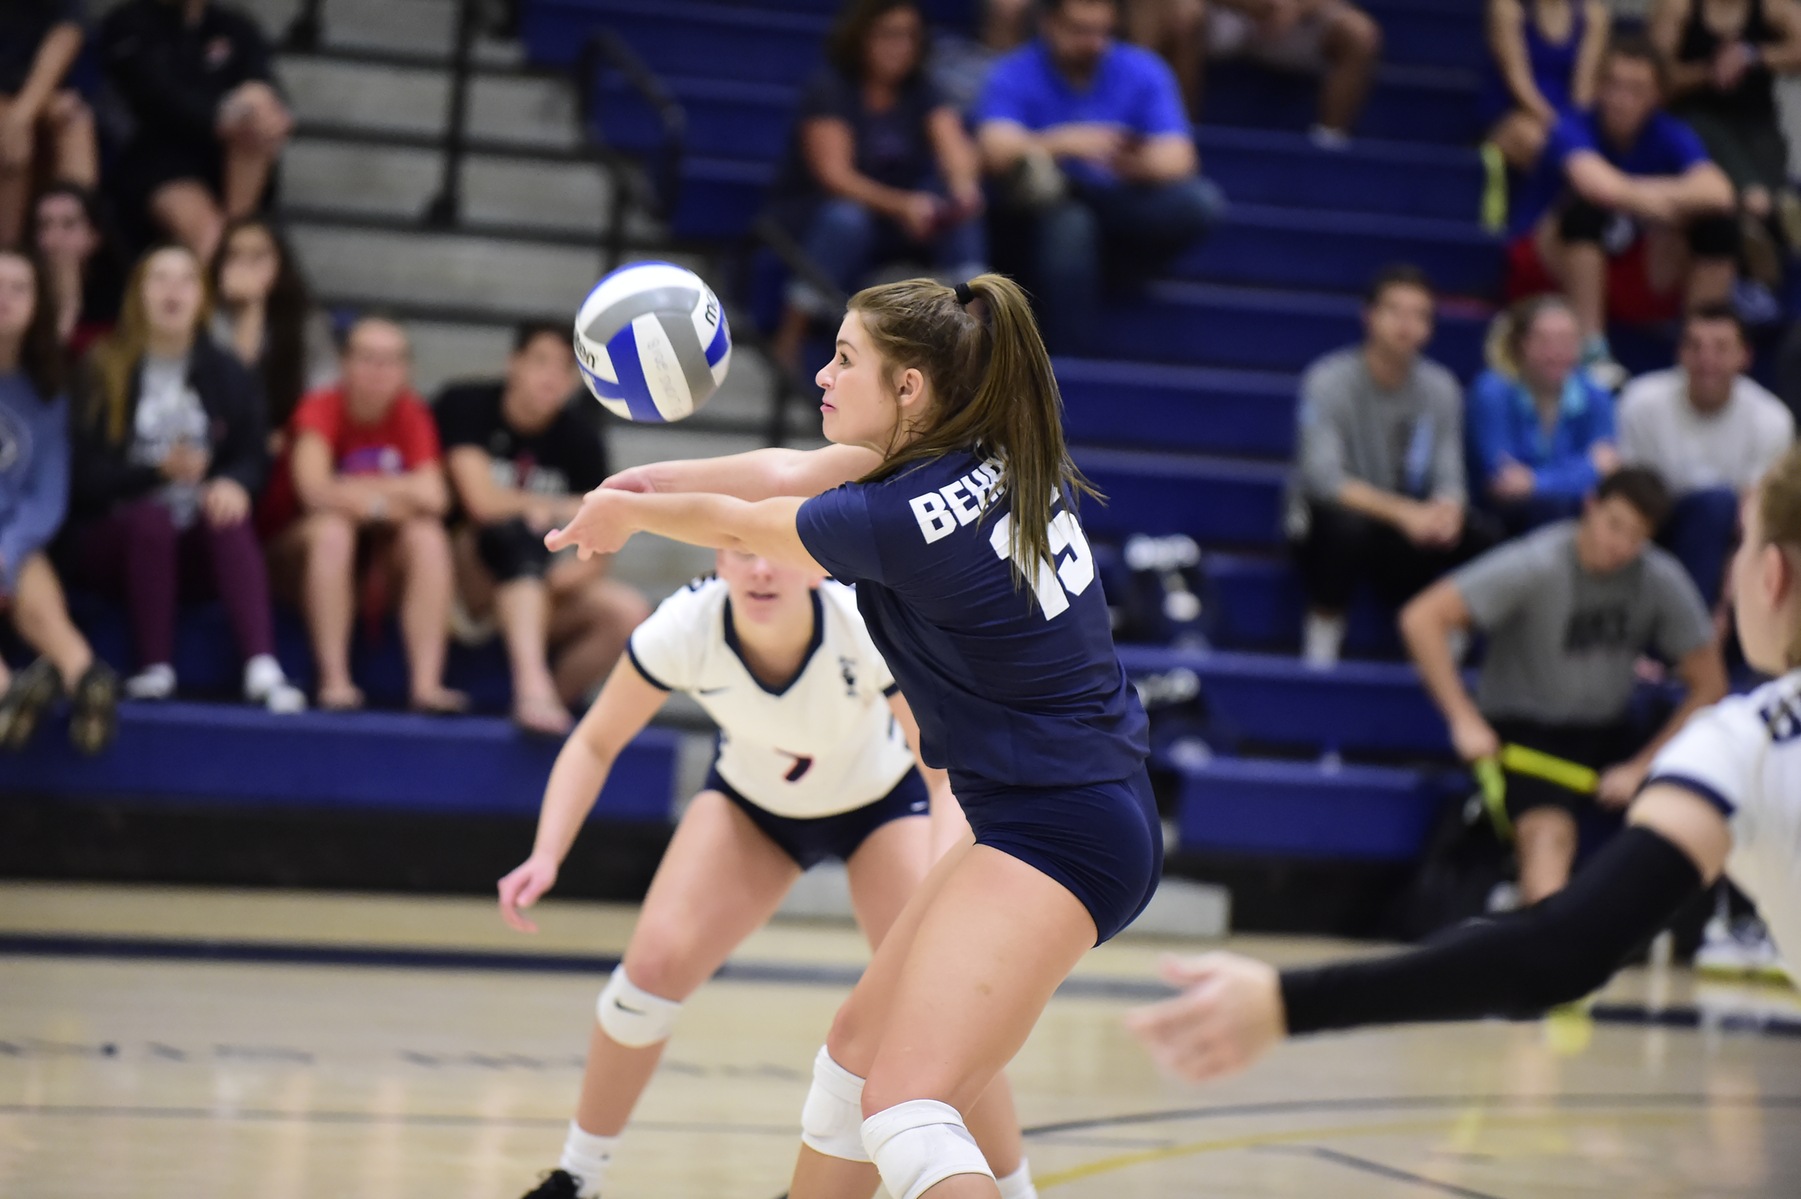 Women's Volleyball Defeats Wilkes in Three; Lions Advance to ECAC Quarterfinals